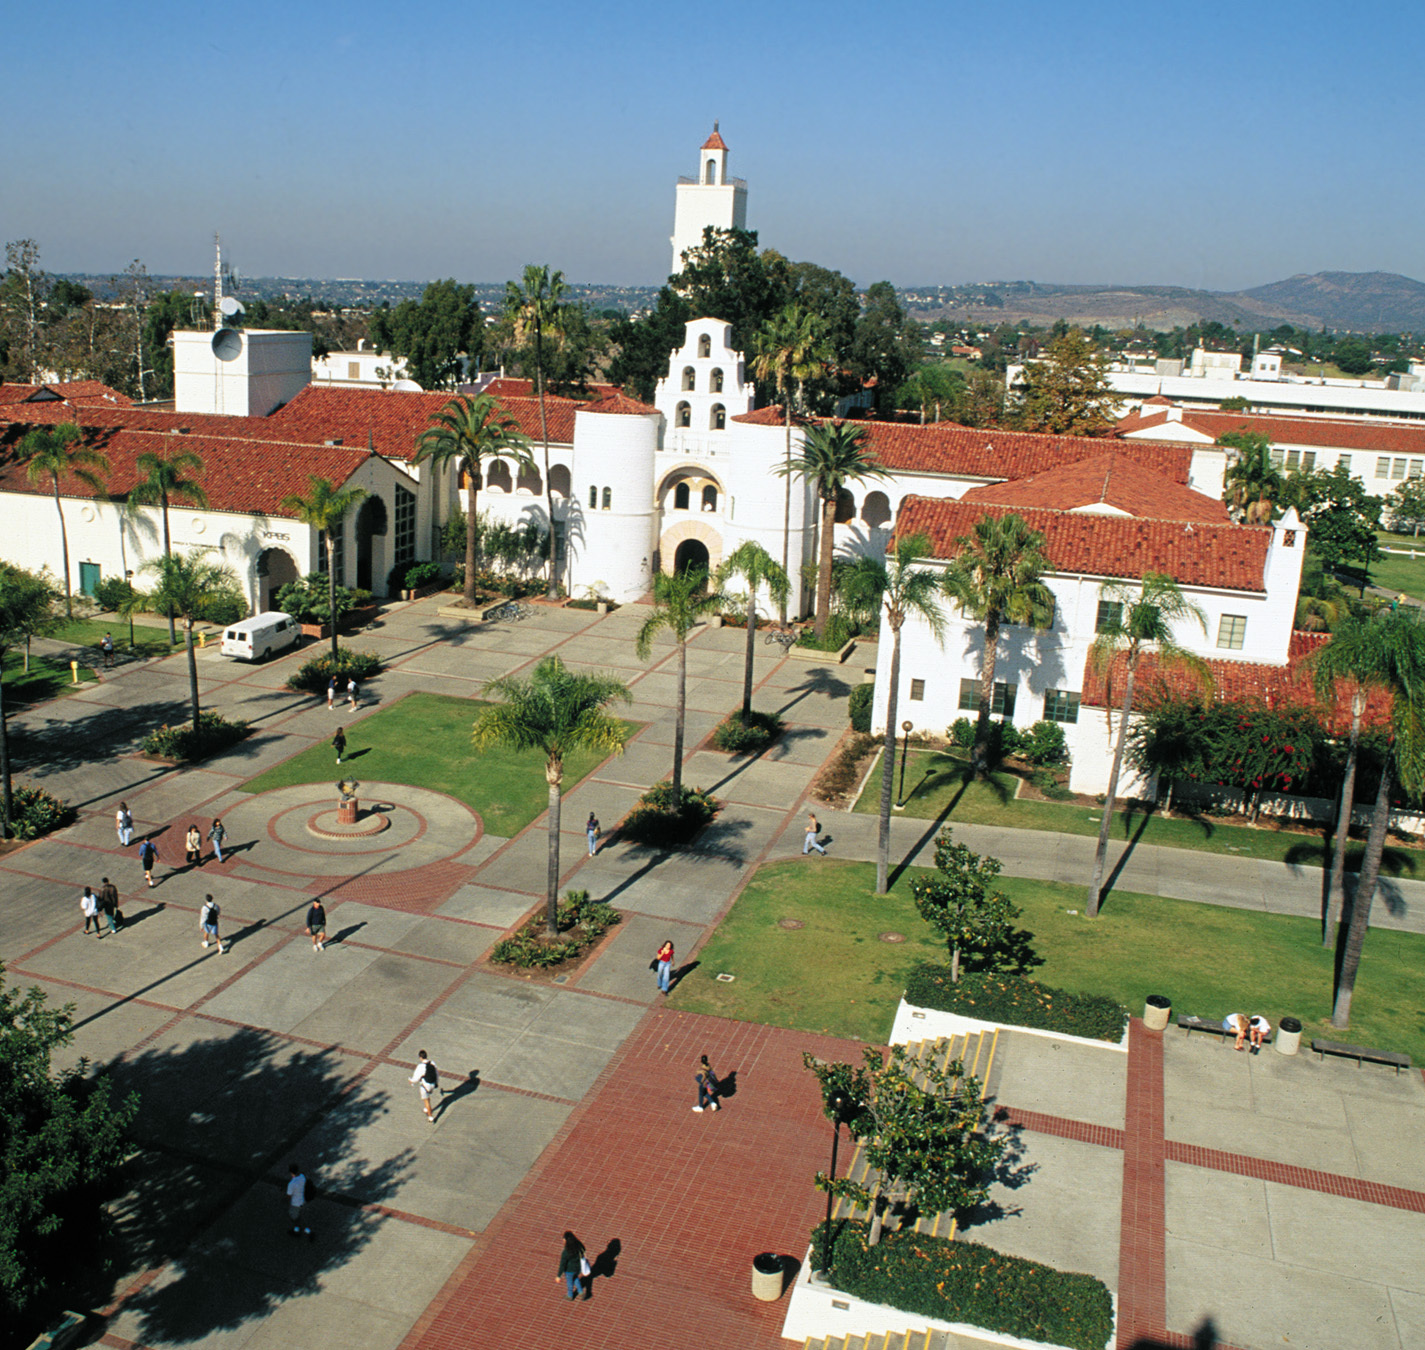 Taste the Blog: What good colleges are there near San Diego?